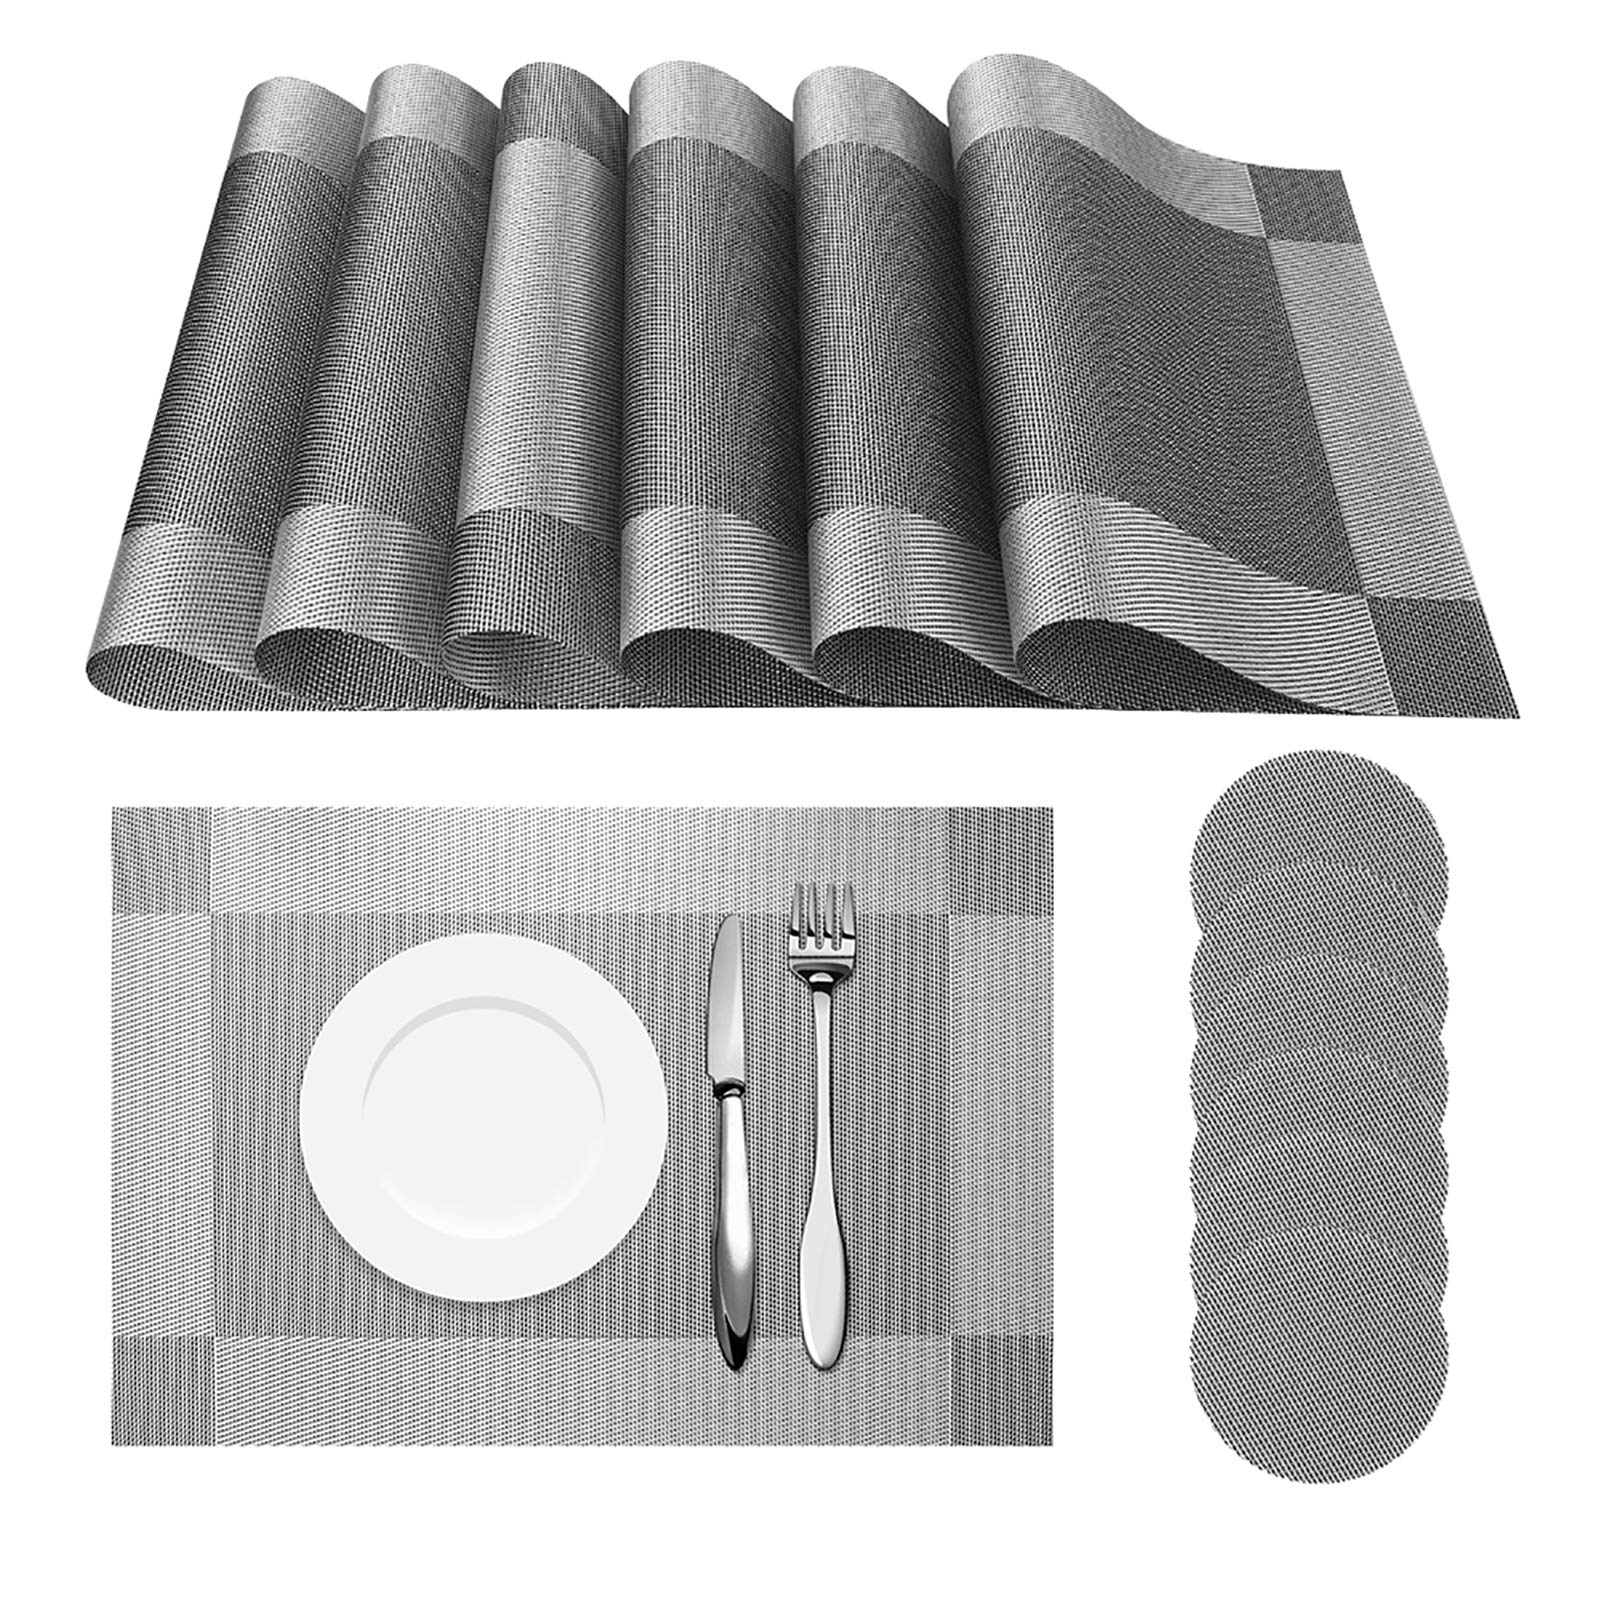 HEYOMART Place Mats and Coasters Non-slip Insulation Kitchen Silver Woven PVC Table Mats Heat-resistant Vinyl Placemats Set of 6, Stain-resistant Washable Dinner Mats for Kitchen and Dining Room, Grey